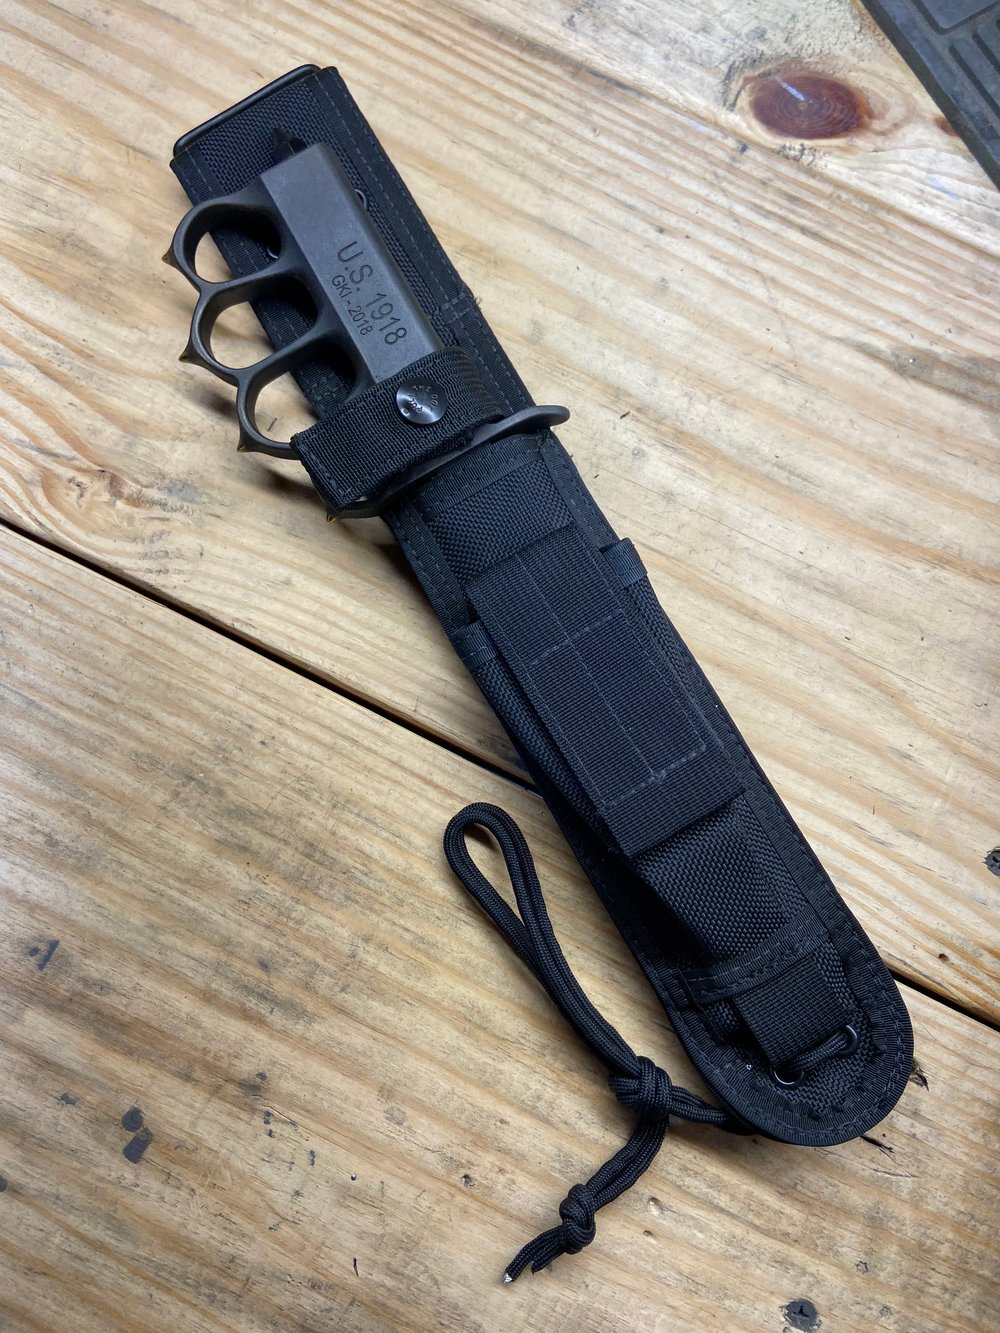 Hogstooth Trench knife